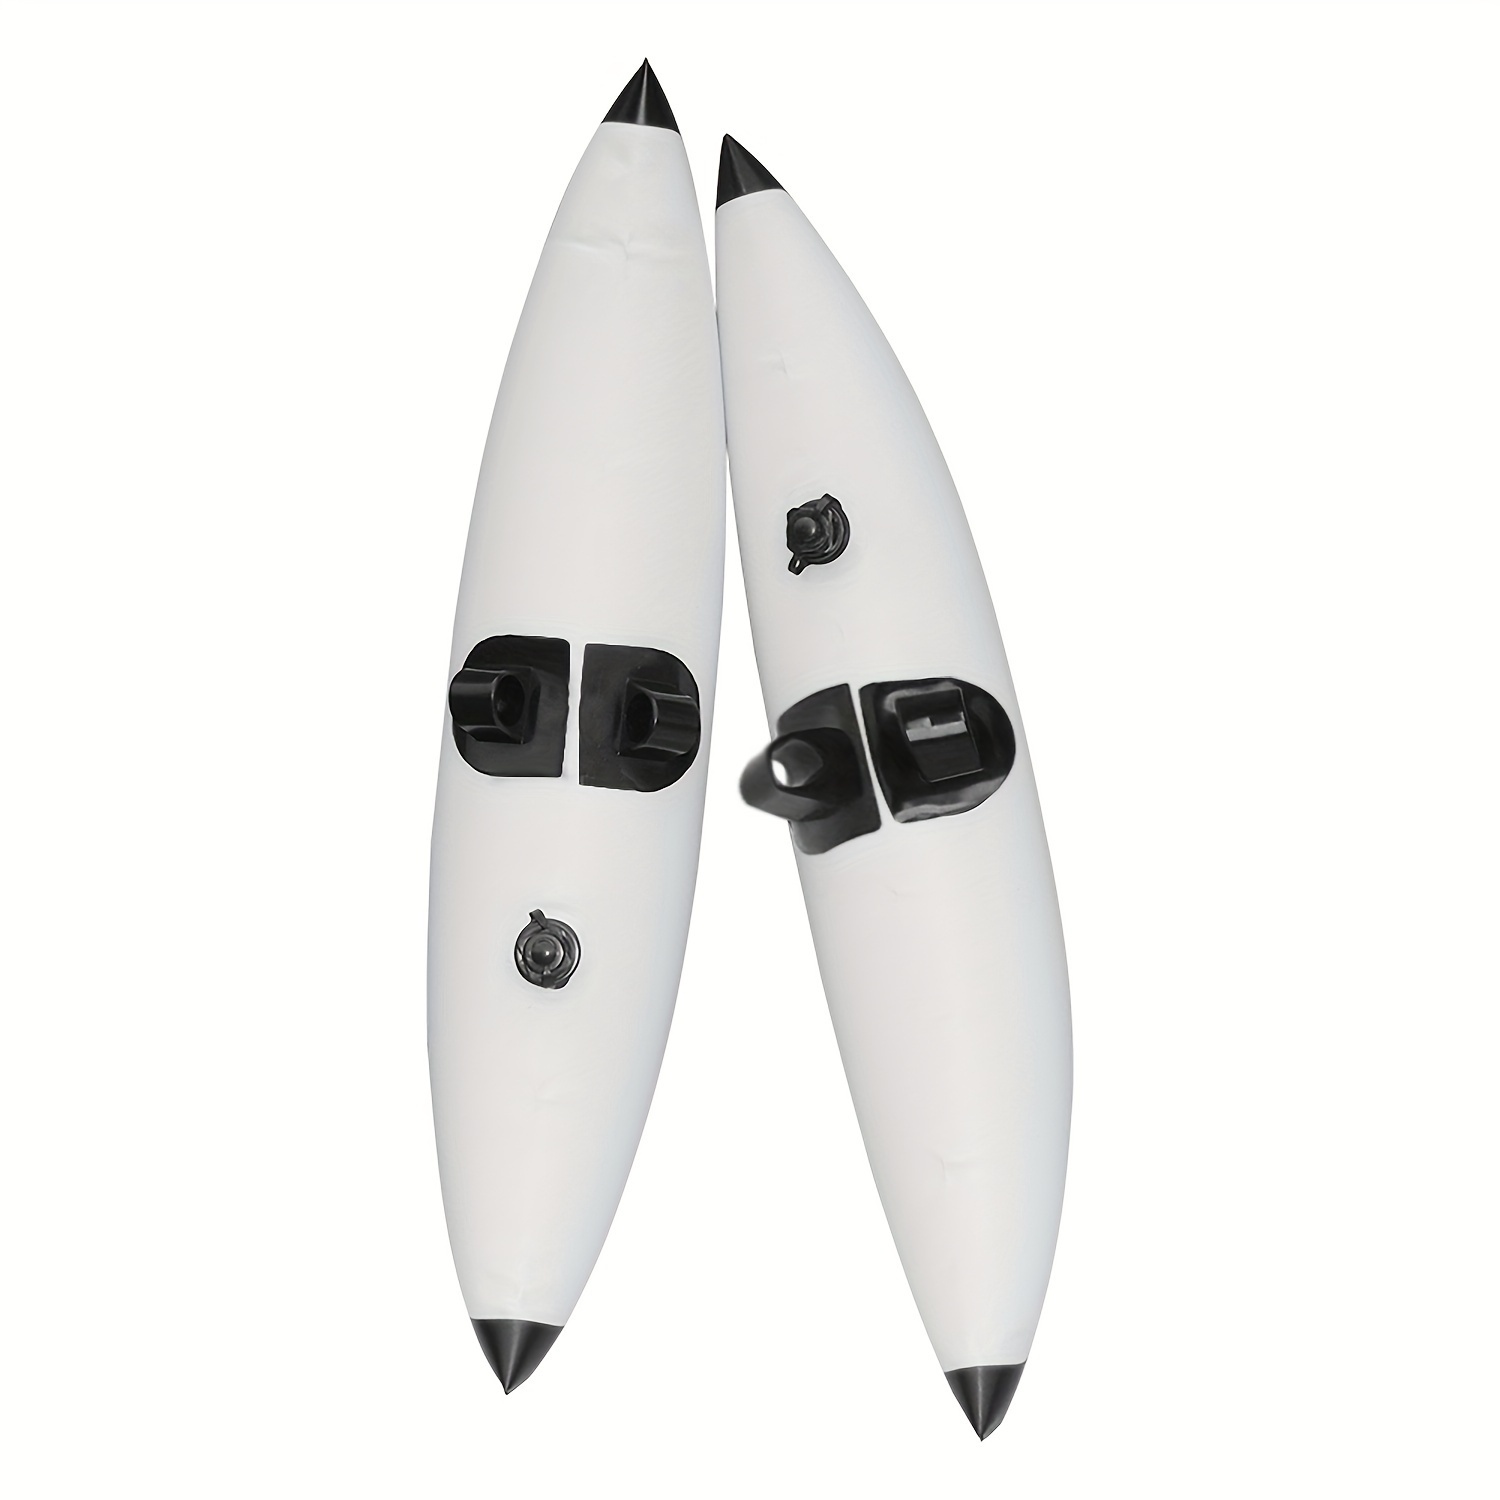 

2 Pieces Kayak Outrigger , Kayak Floating Barrels, Standing System, Water Kayak Floats Buoy, Easy To Install, For Floating Balancing Boat